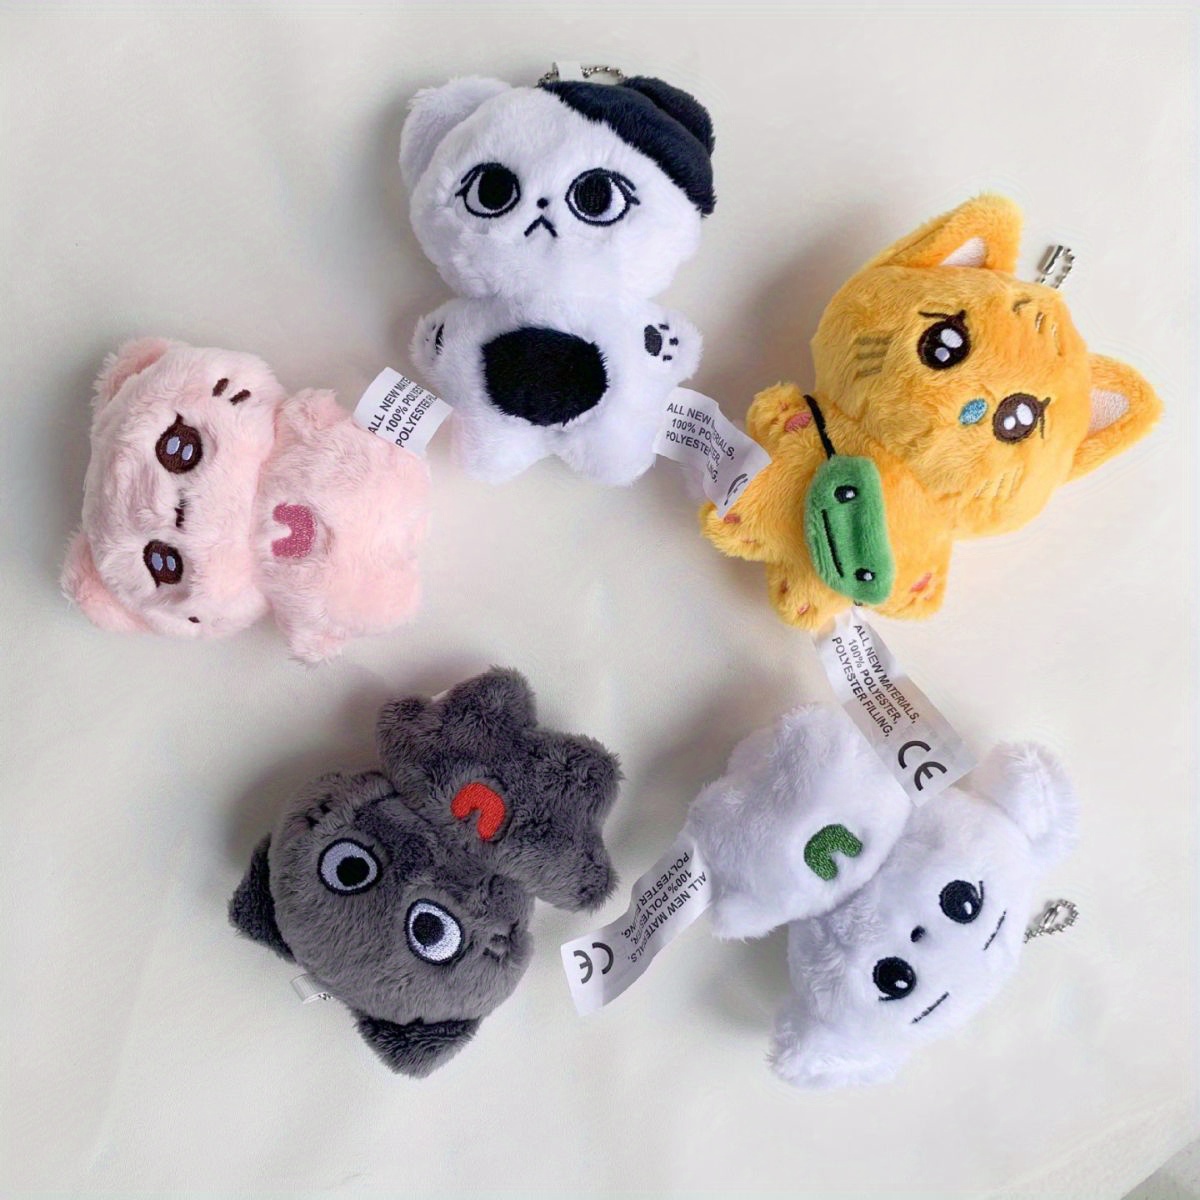 1pc, NewJeans Doll DANIELLE, Kim Wenchi, MINJI, Jiang Hailin, Haerin, Black And White Cat Doll, Key Chain, The Best Gift For NewJeans Fans